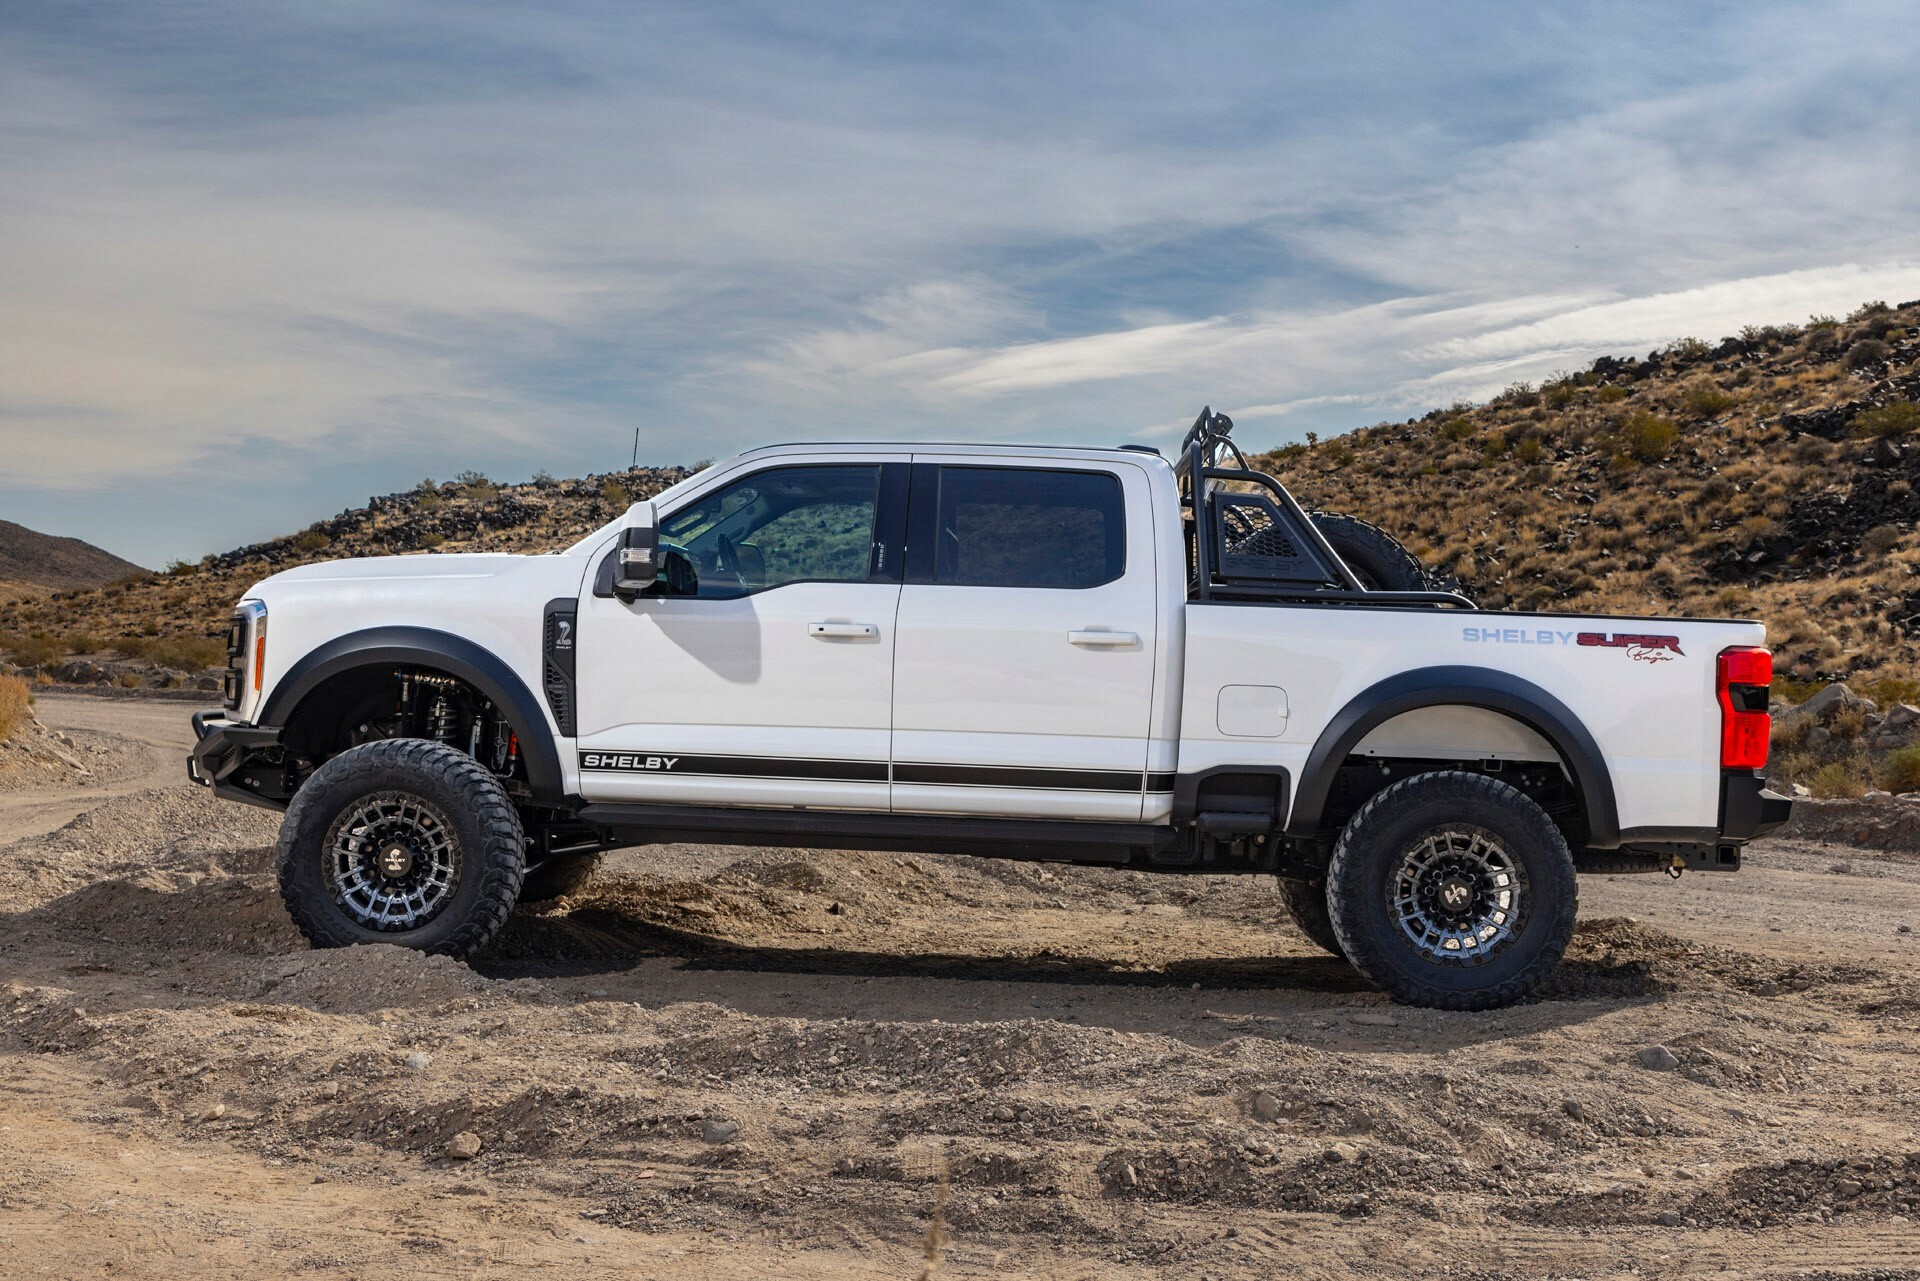 Ford Shelby F250 Super Baja Is The Closest You’ll Get To A Diesel